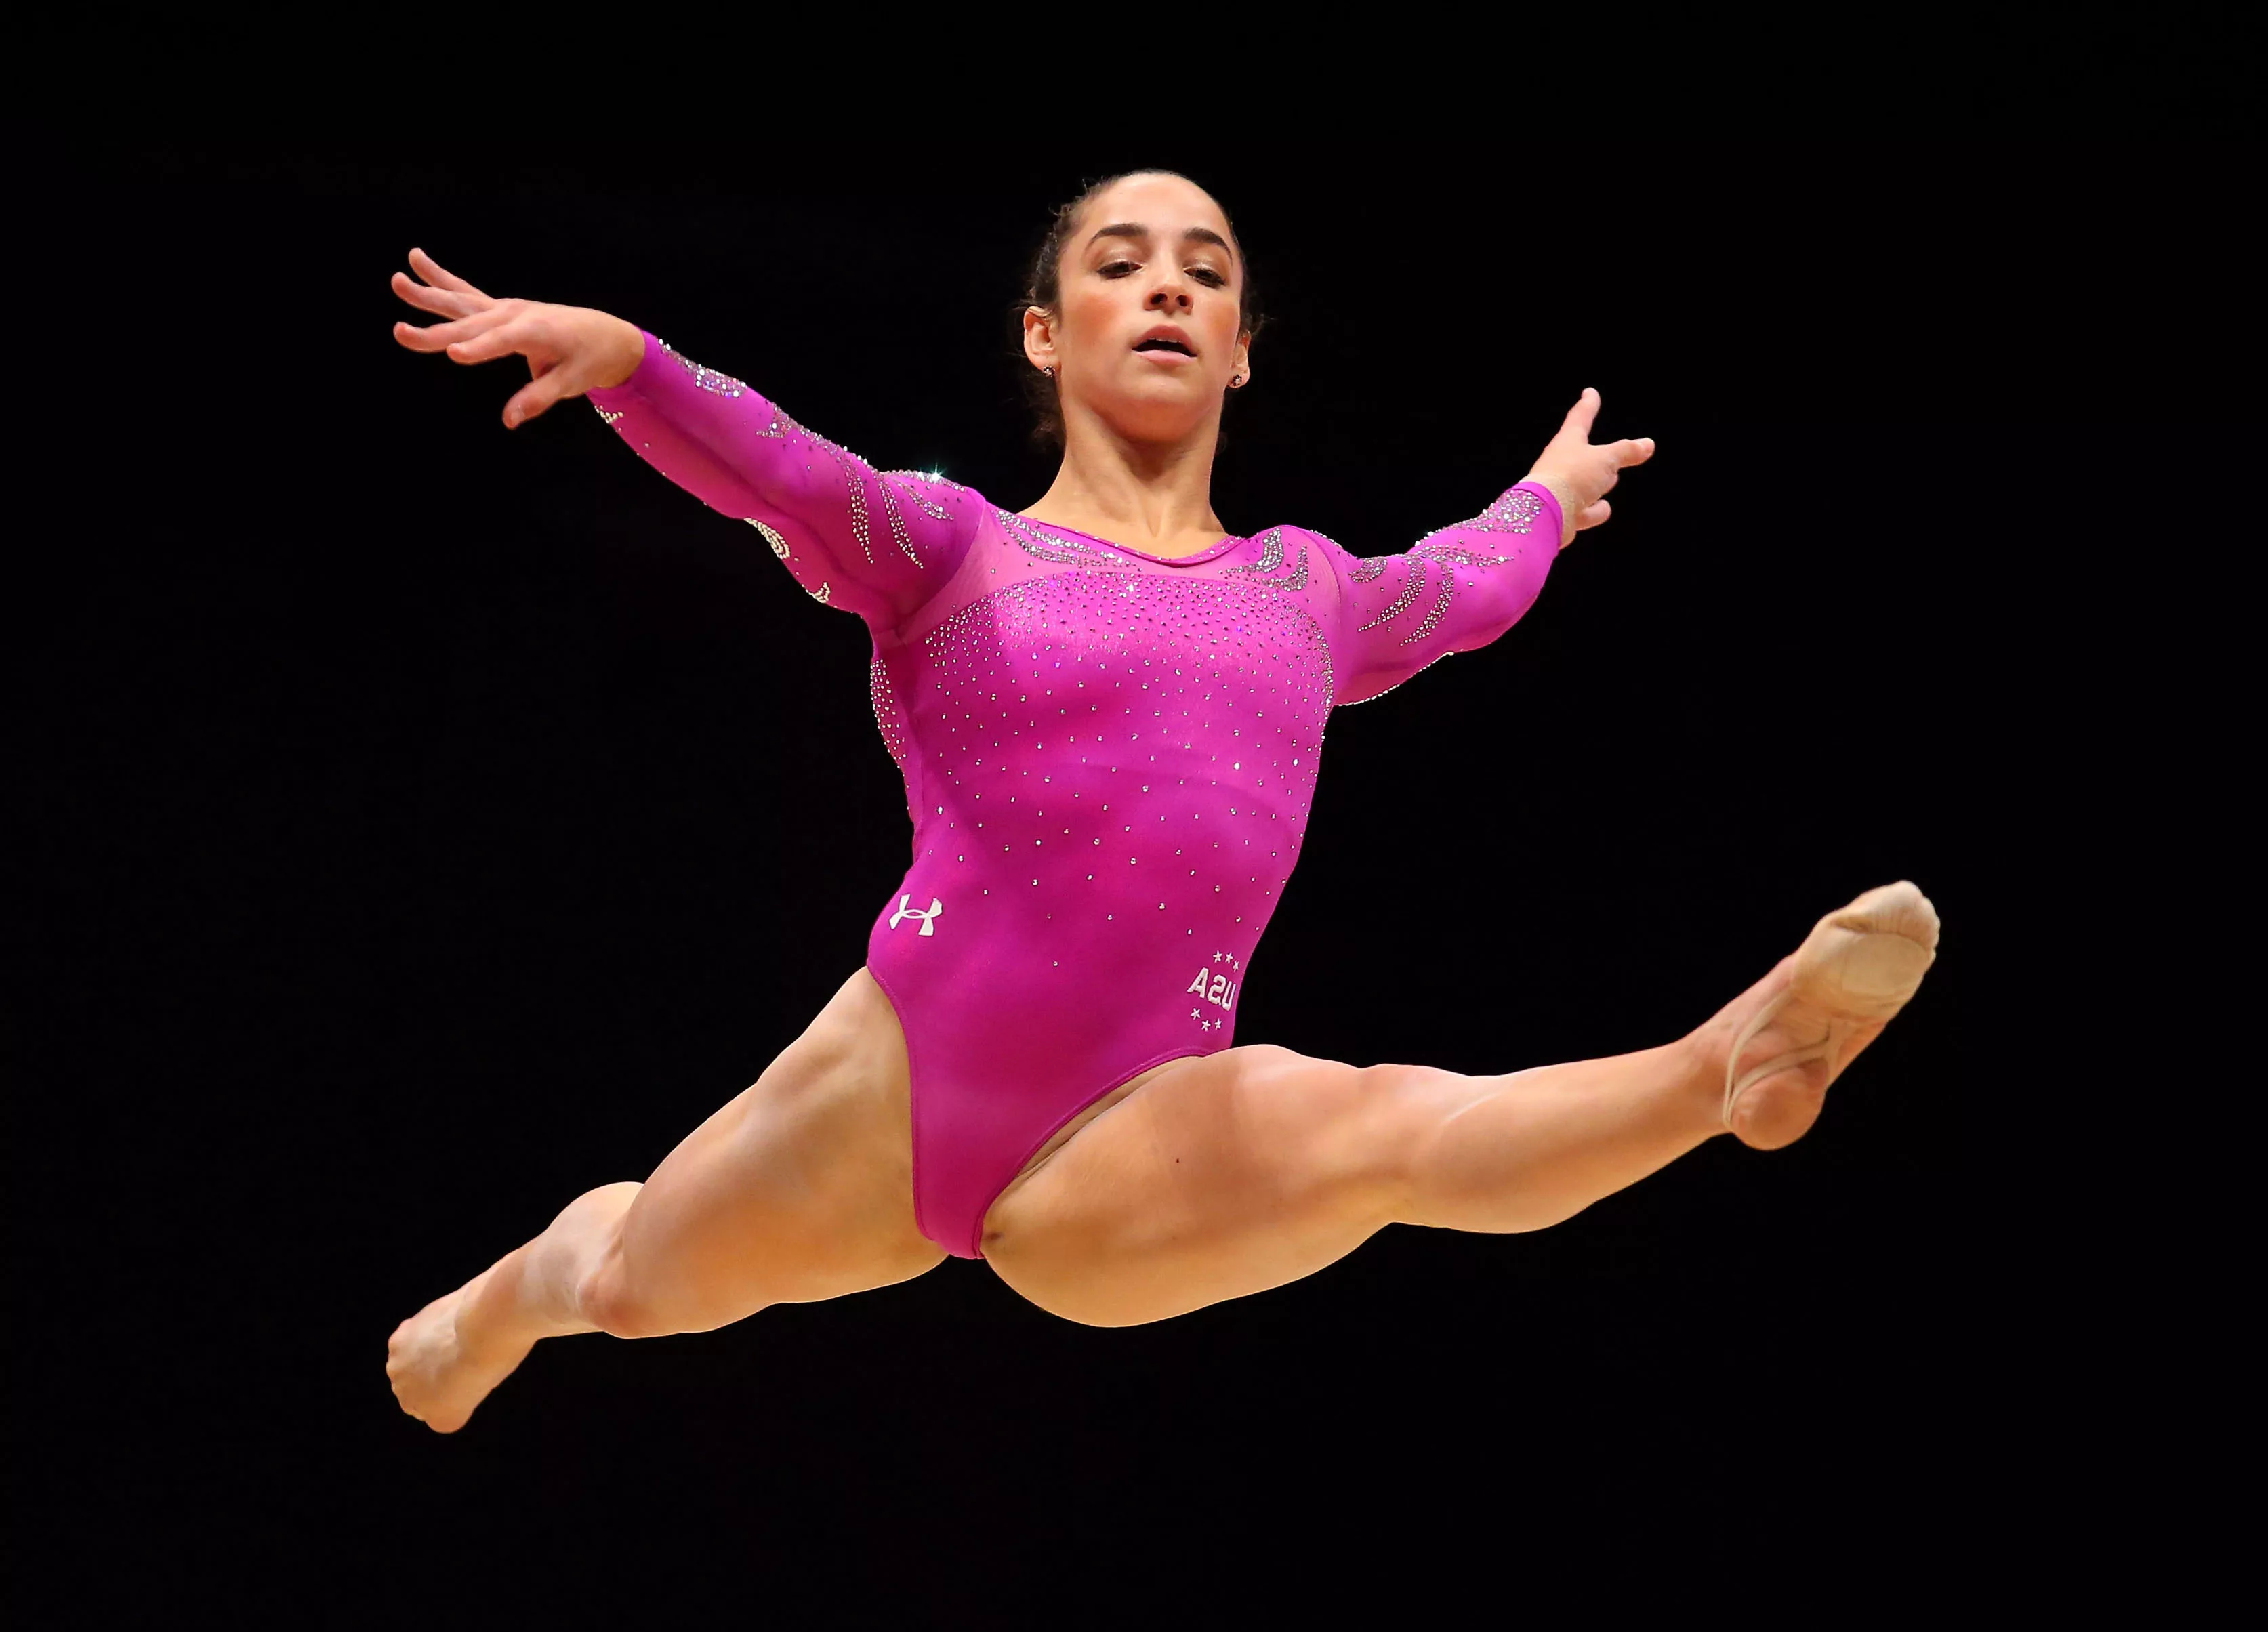 SNAP! Gymnast Aly Raisman Naked * Fappening Sauce